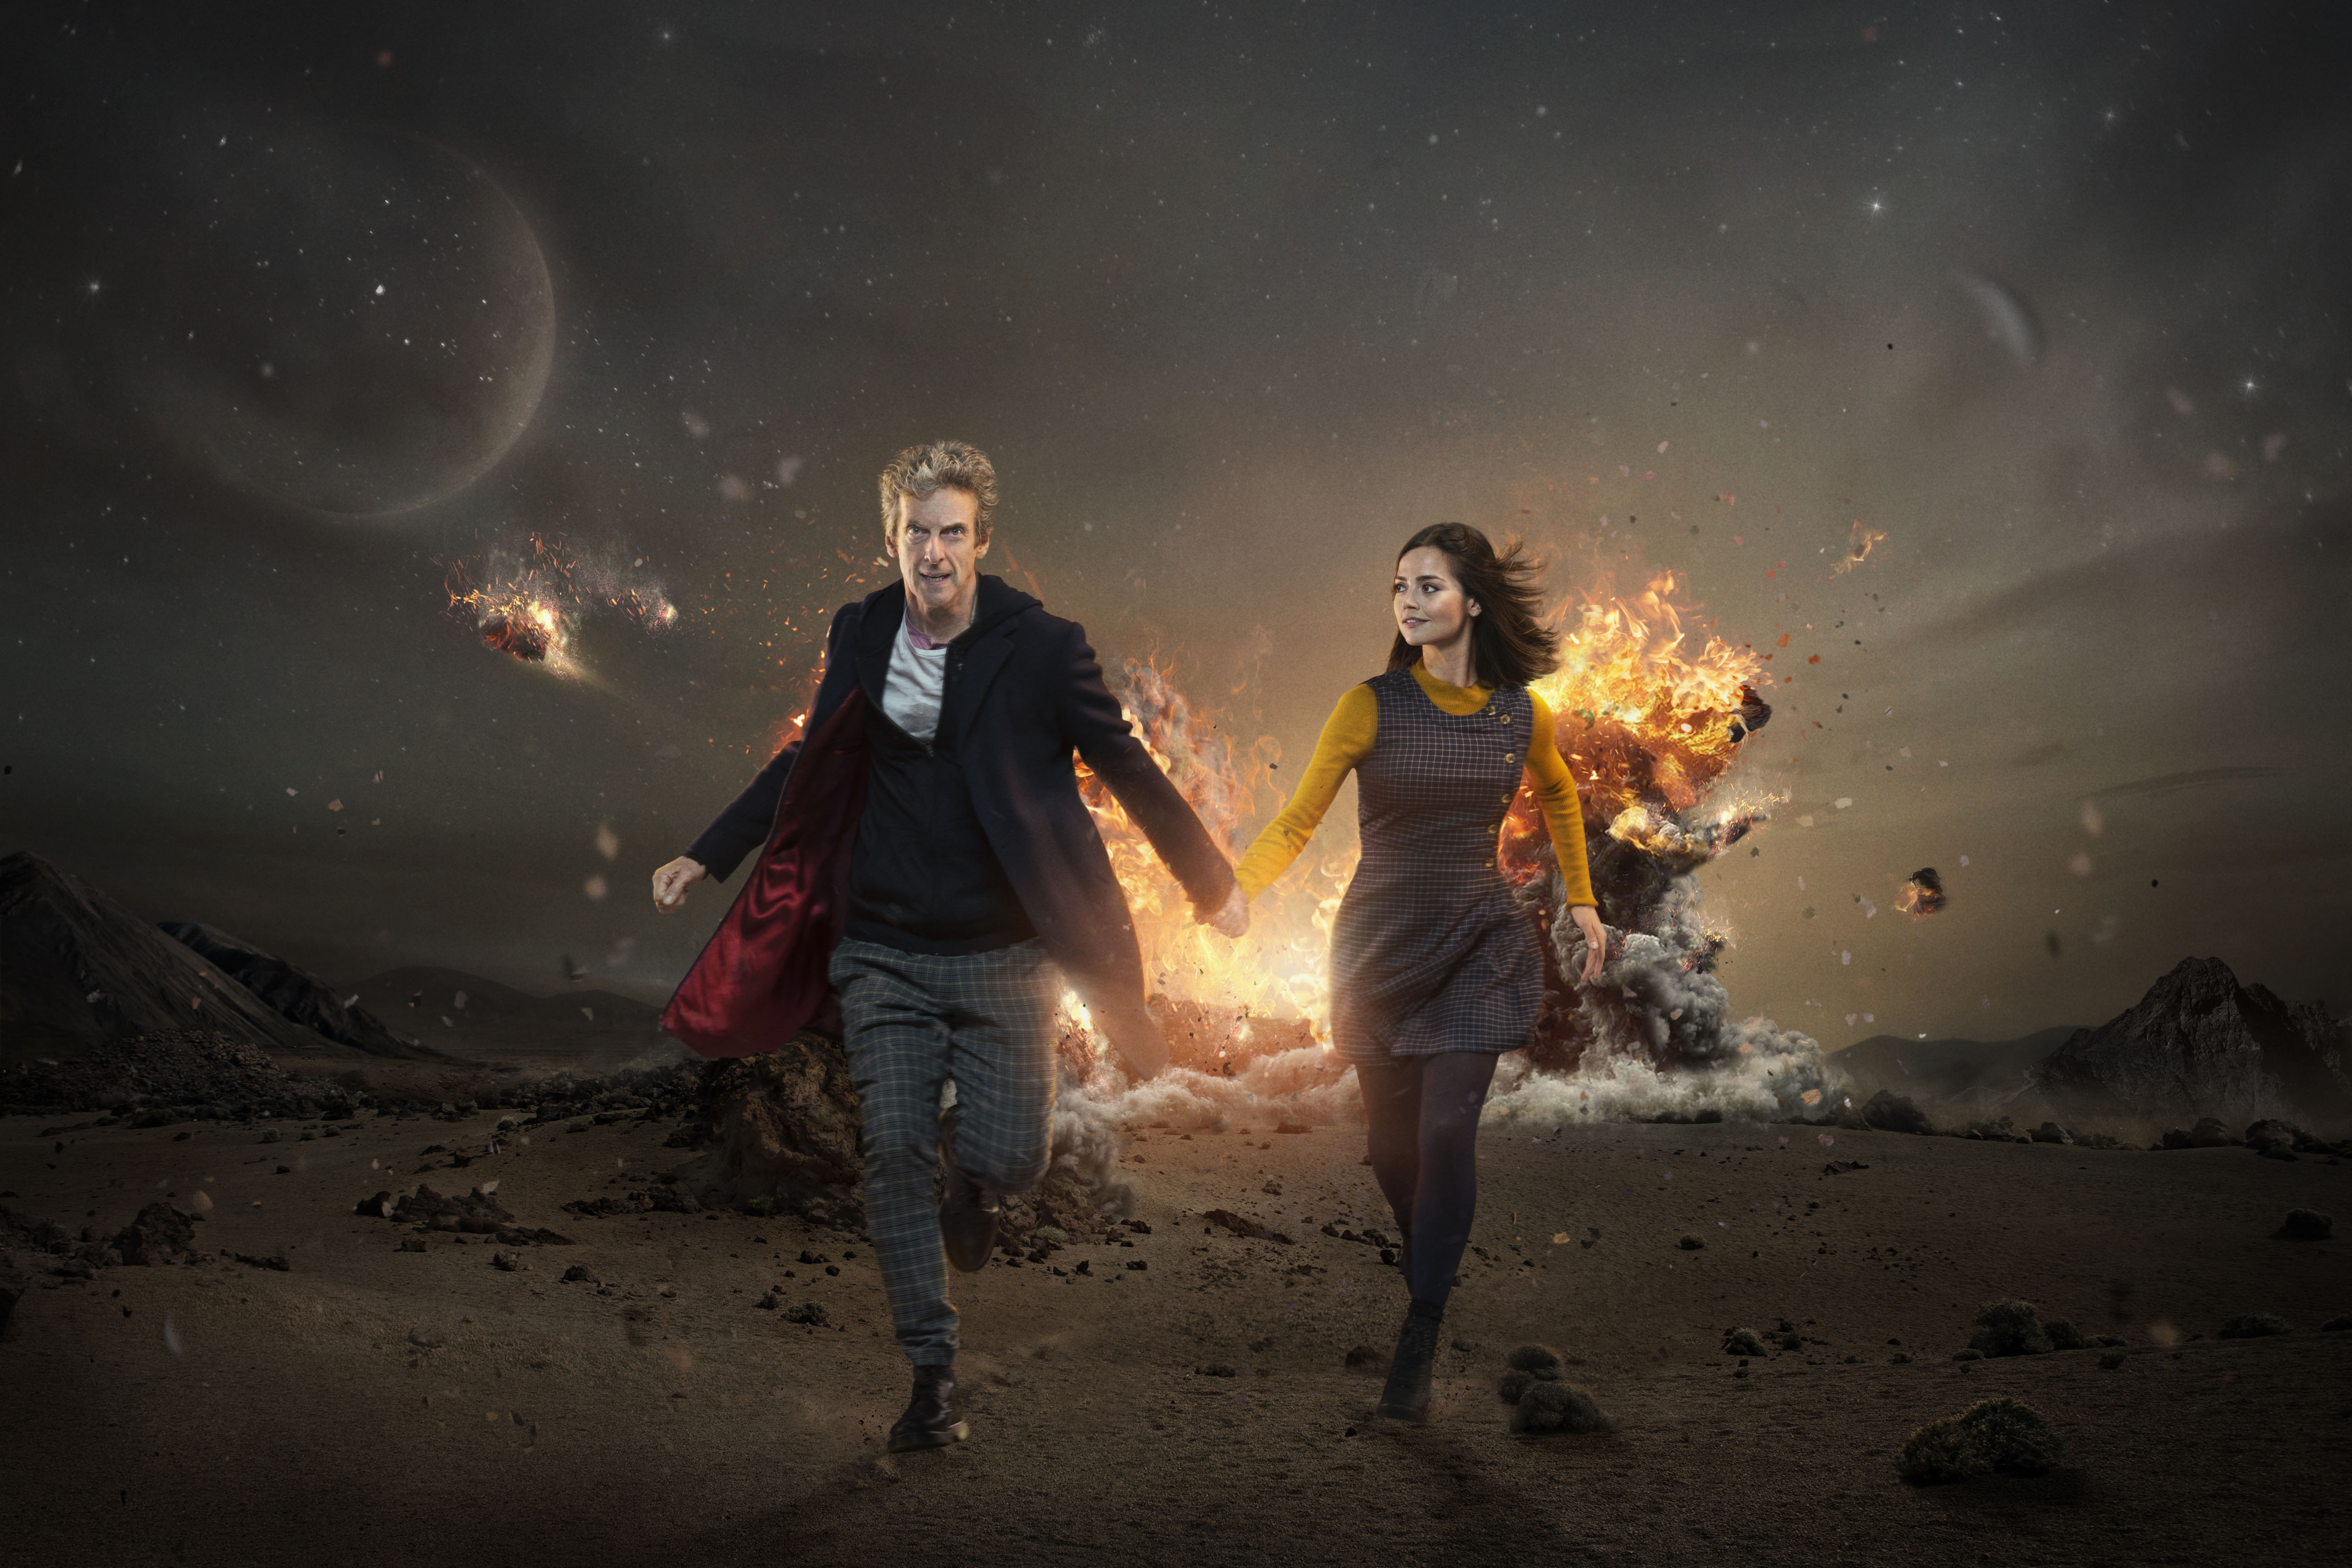 vertical wallpaper doctor who, tv show, clara oswald, jenna coleman, running, sci fi, the doctor